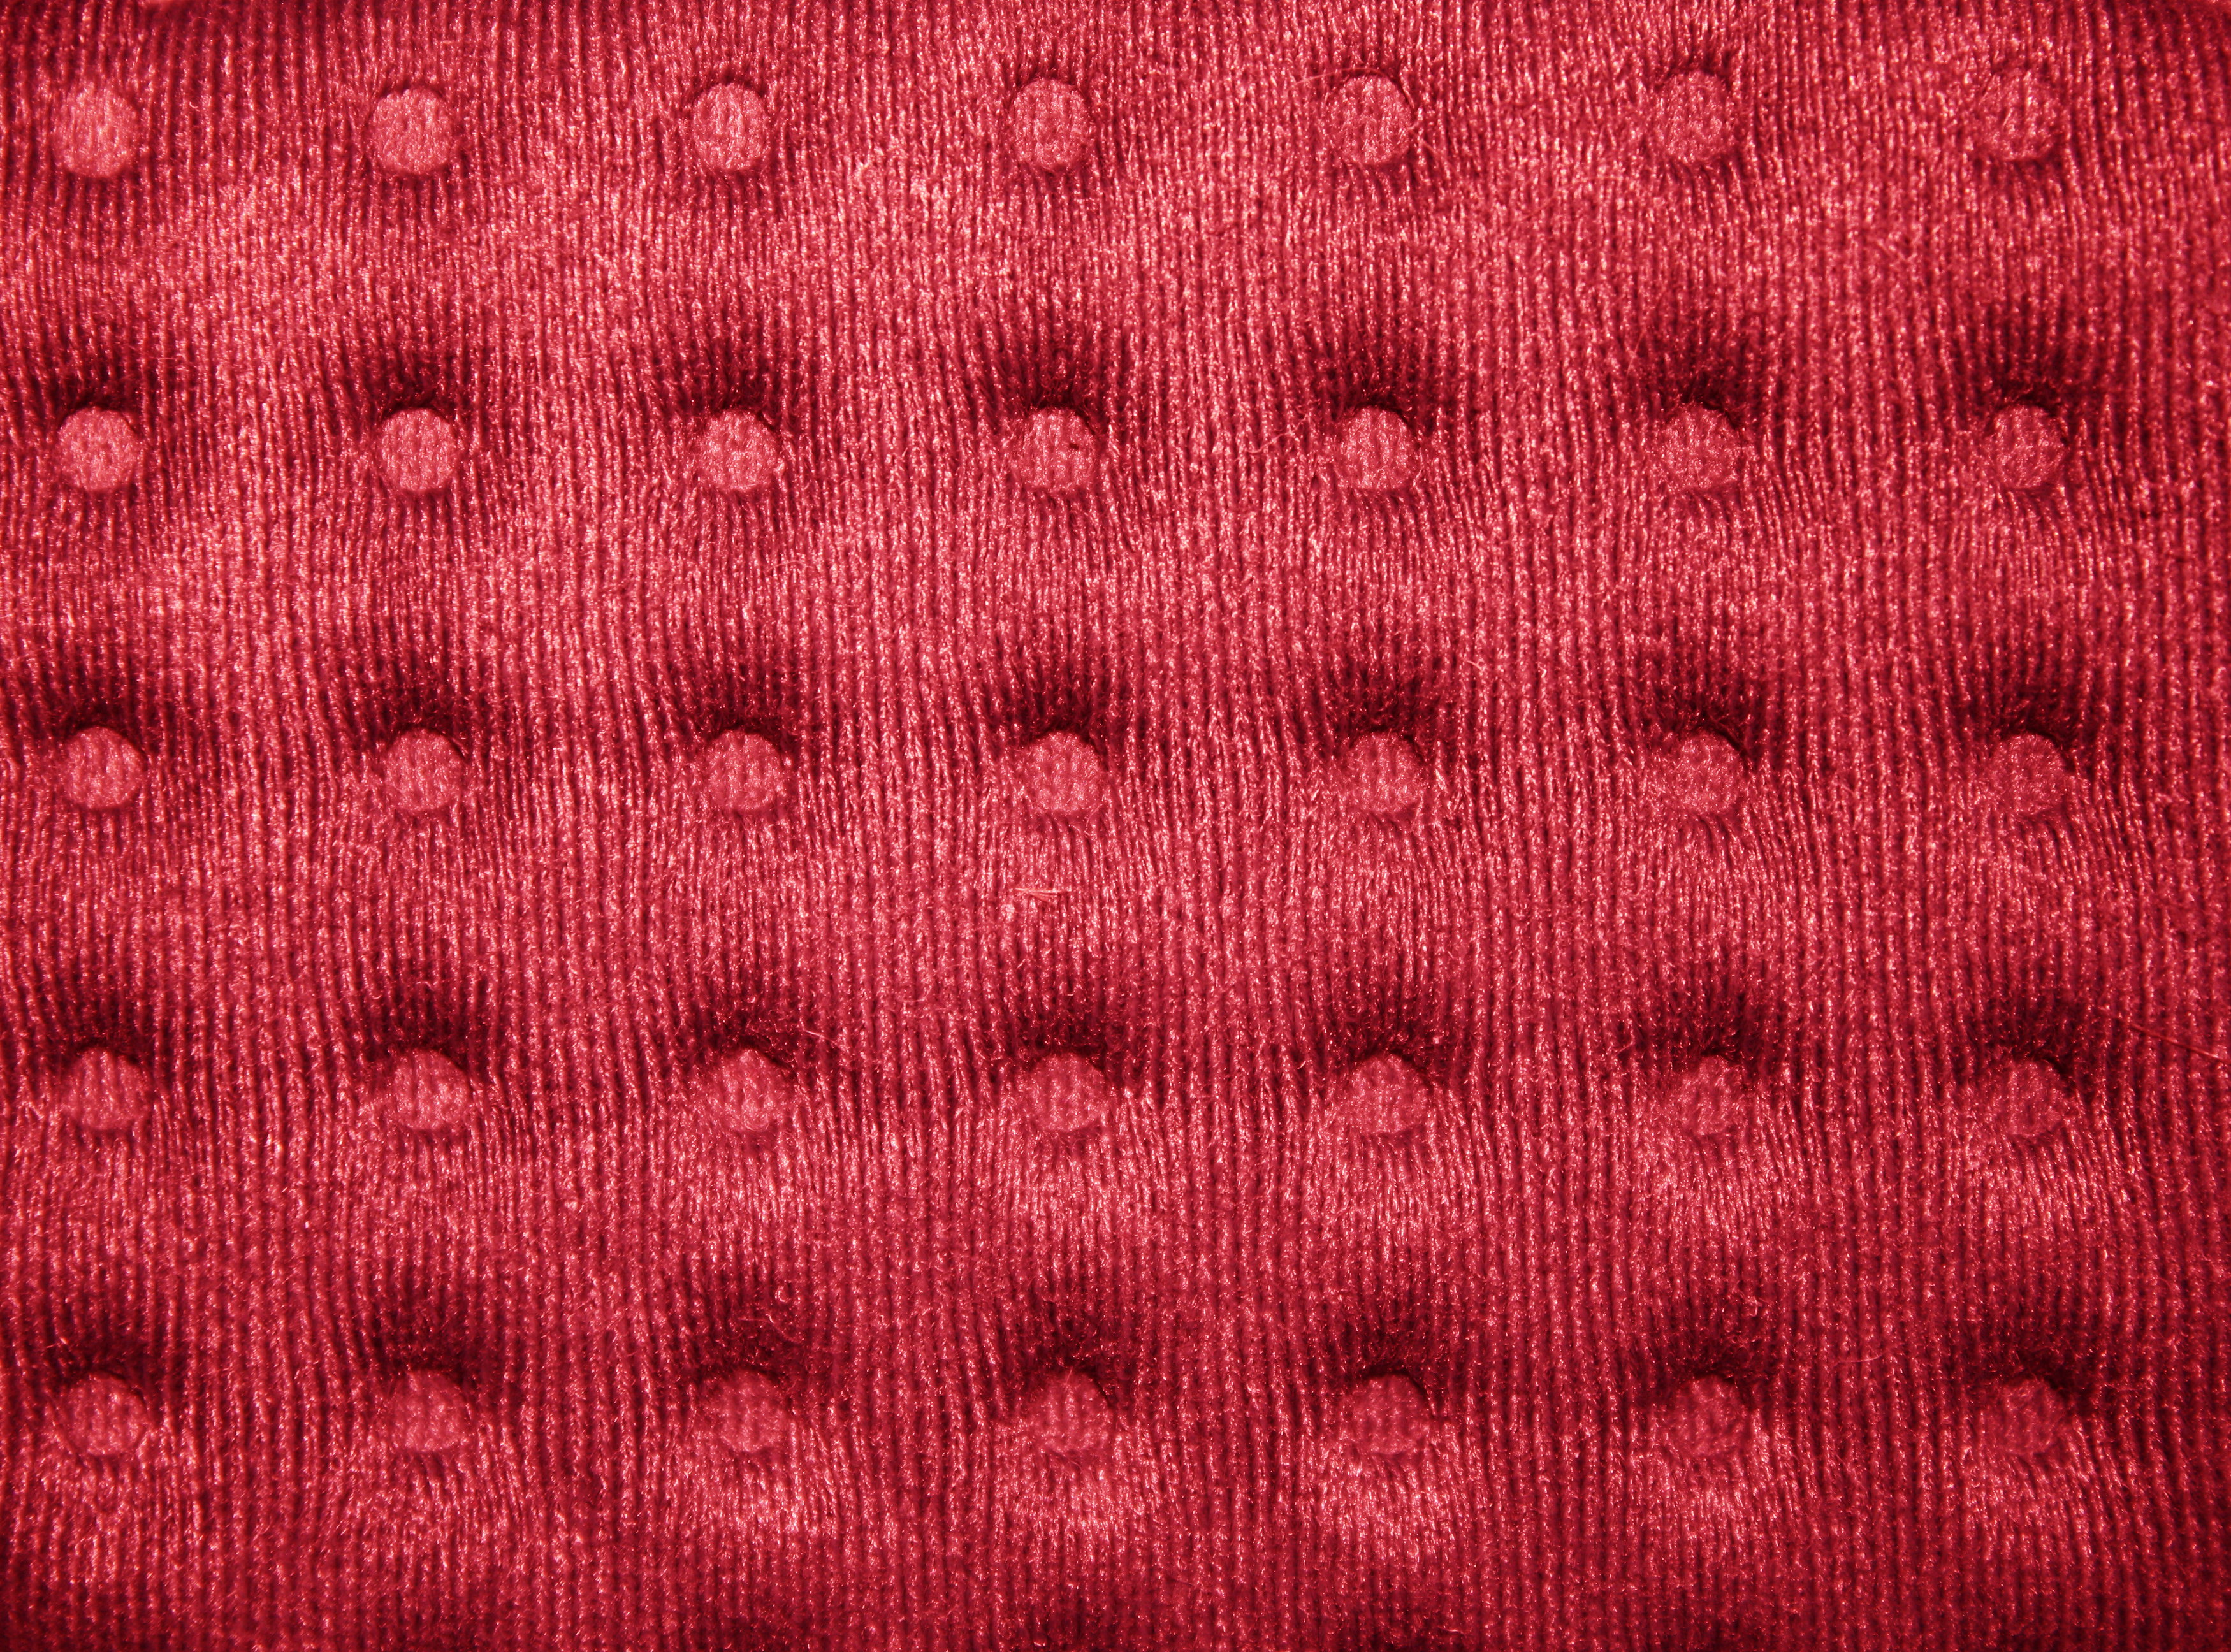 Red Tufted Fabric Texture Picture Free Photograph Photos Public Domain ...